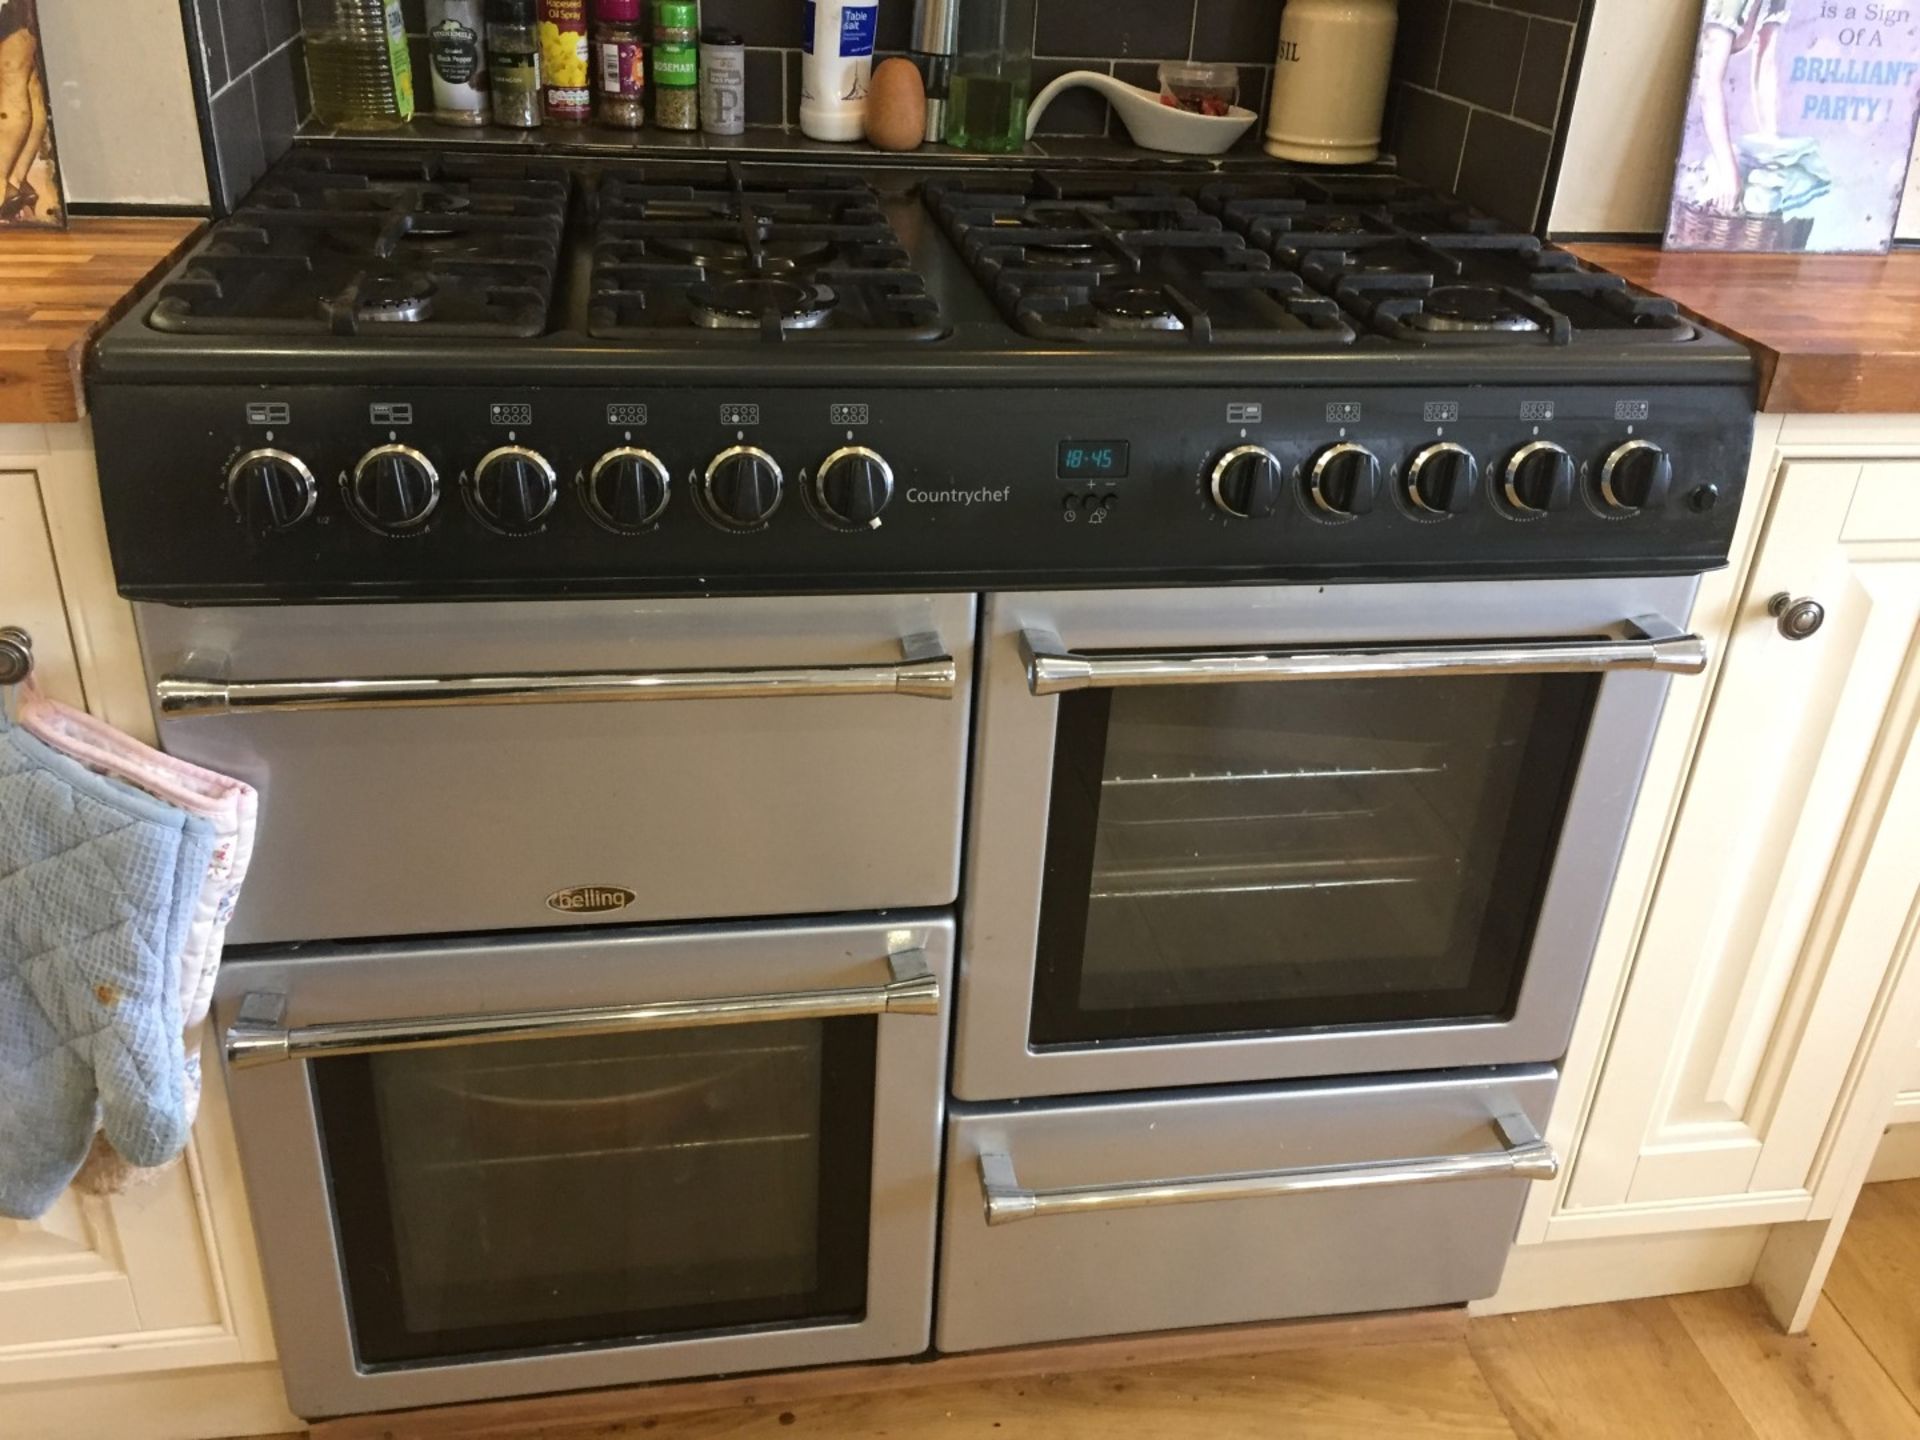 1 x Belling 100G Silver Countrychef 8-Burner, 2 Oven Range - In Good Working Condition - CL238 - - Image 2 of 13